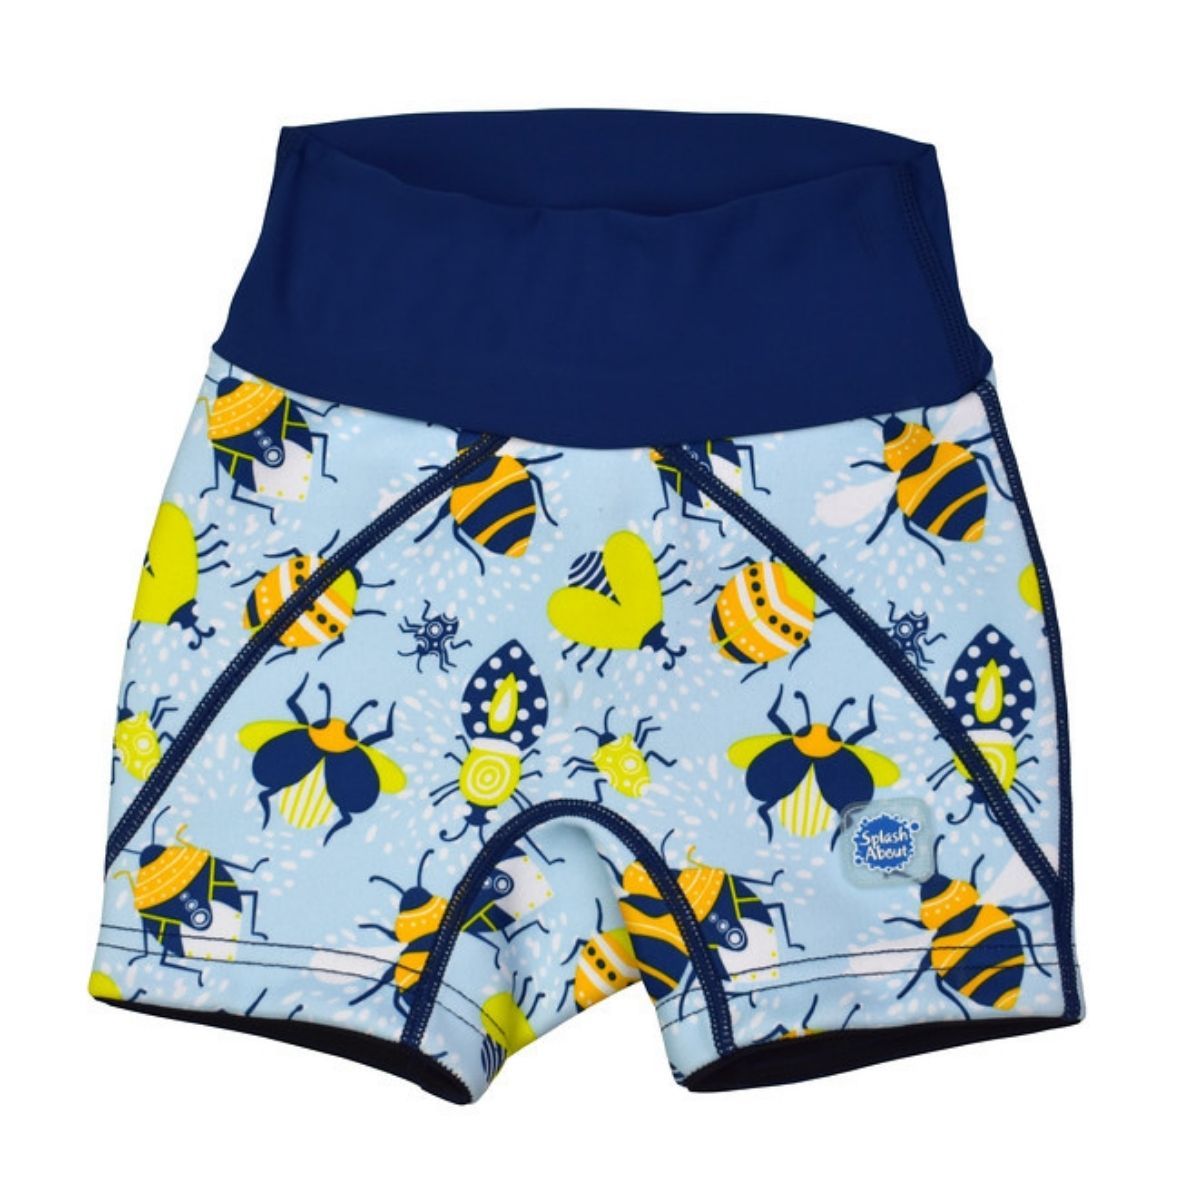 Neoprene swim shorts in light blue with navy blue trims and insects print. Front.